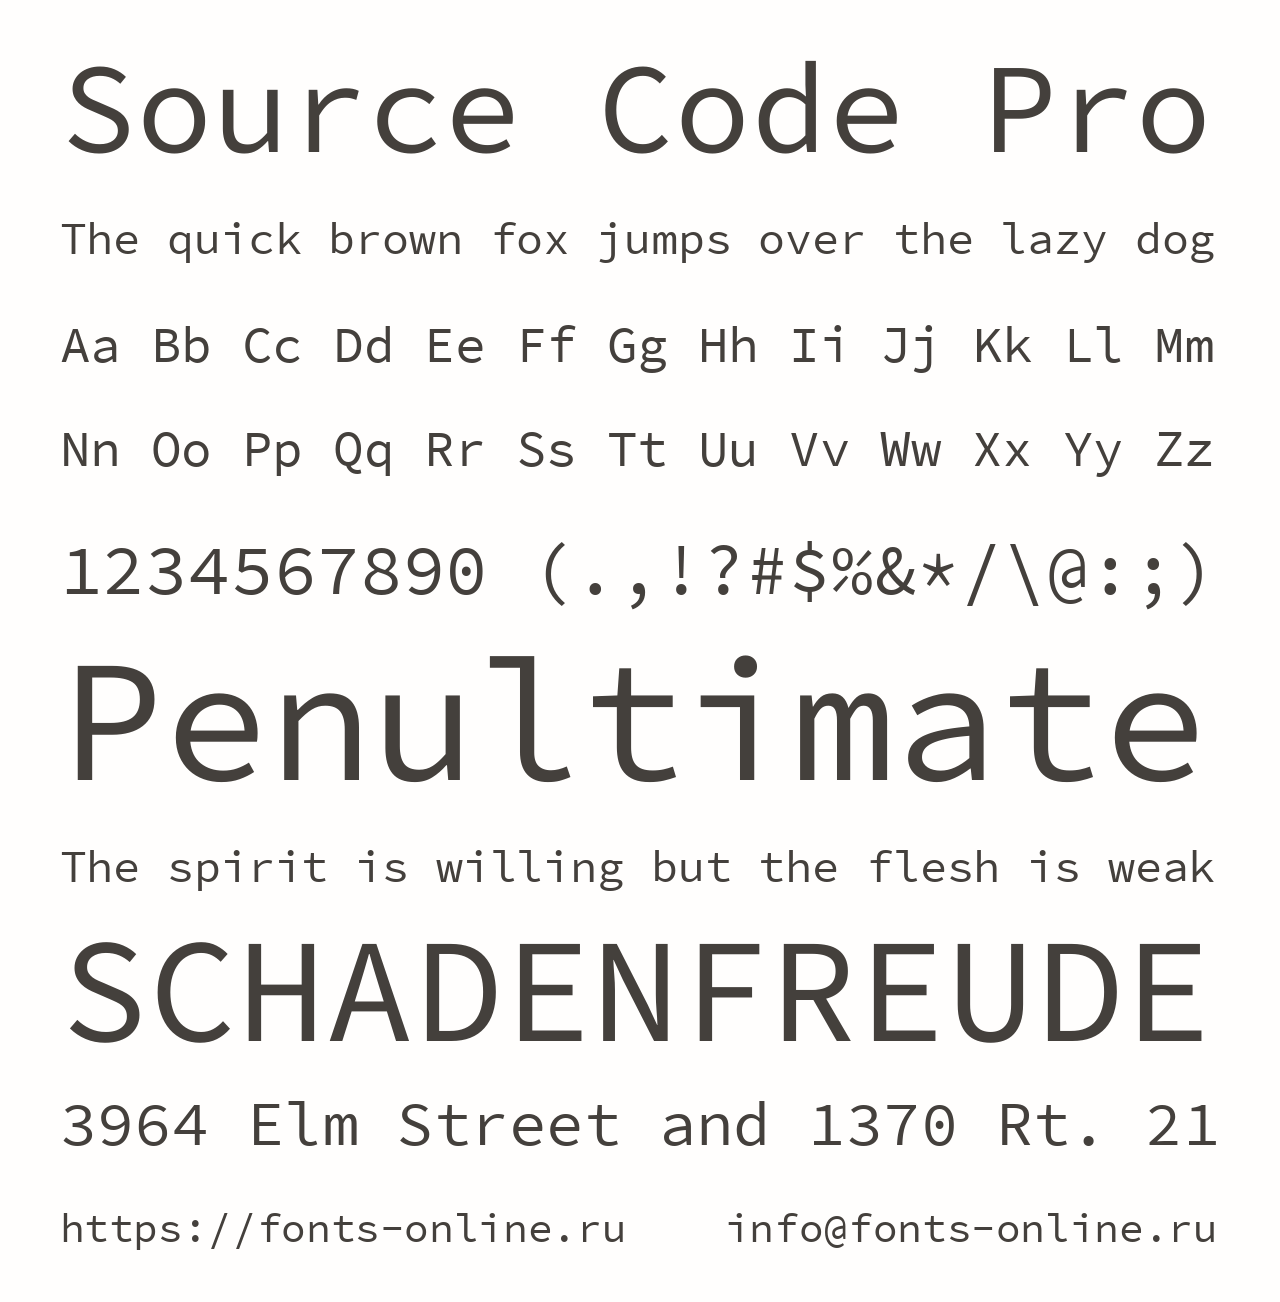 Source Code Pro cannot be styled in Firefox · Issue #217 ·  adobe-fonts/source-code-pro · GitHub